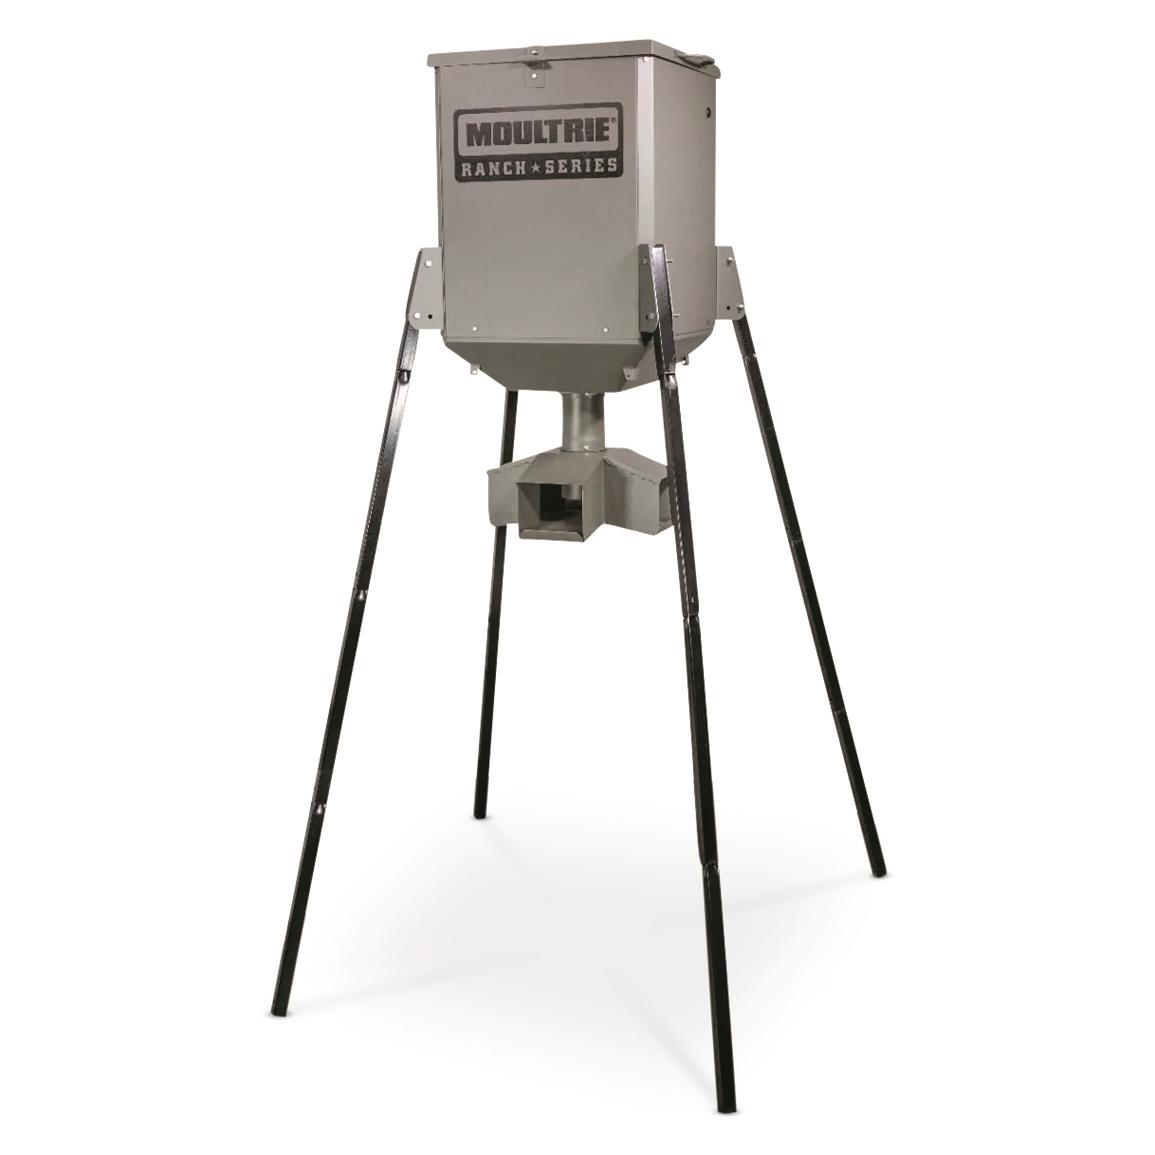 Moultrie Ranch Series 300-lb. Gravity Feeder